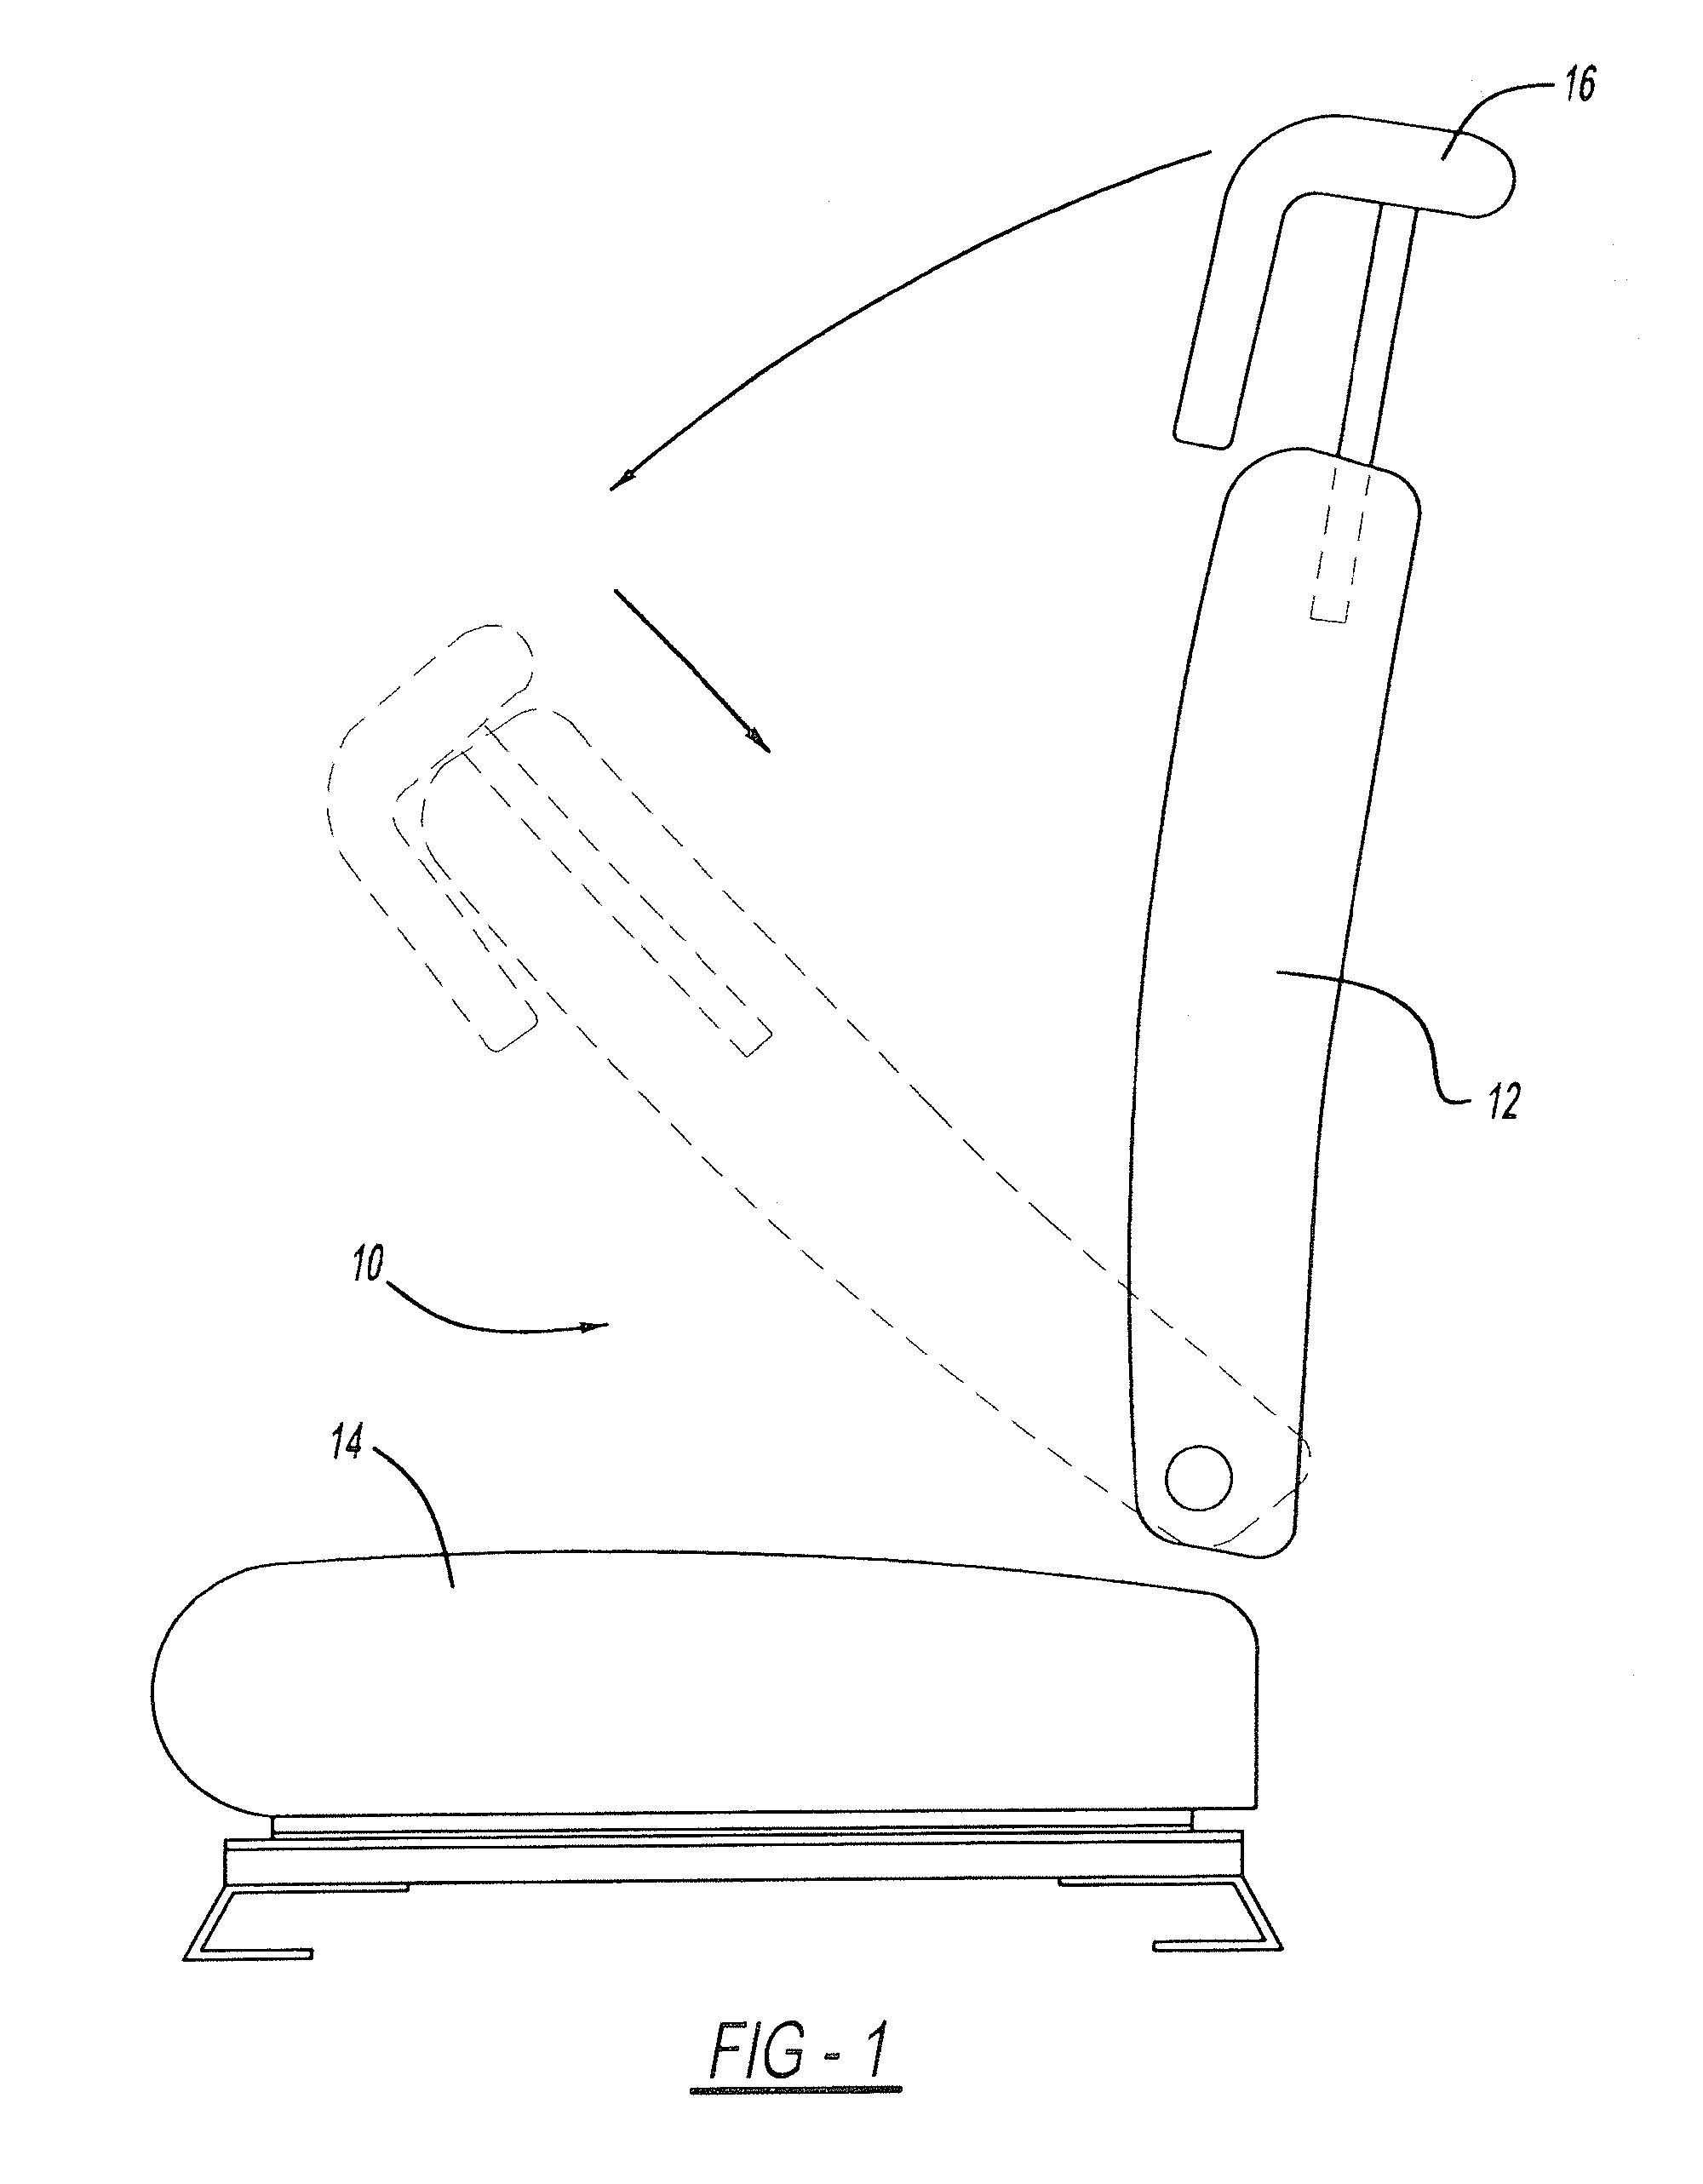 System for seat-actuated head rest extension and retraction